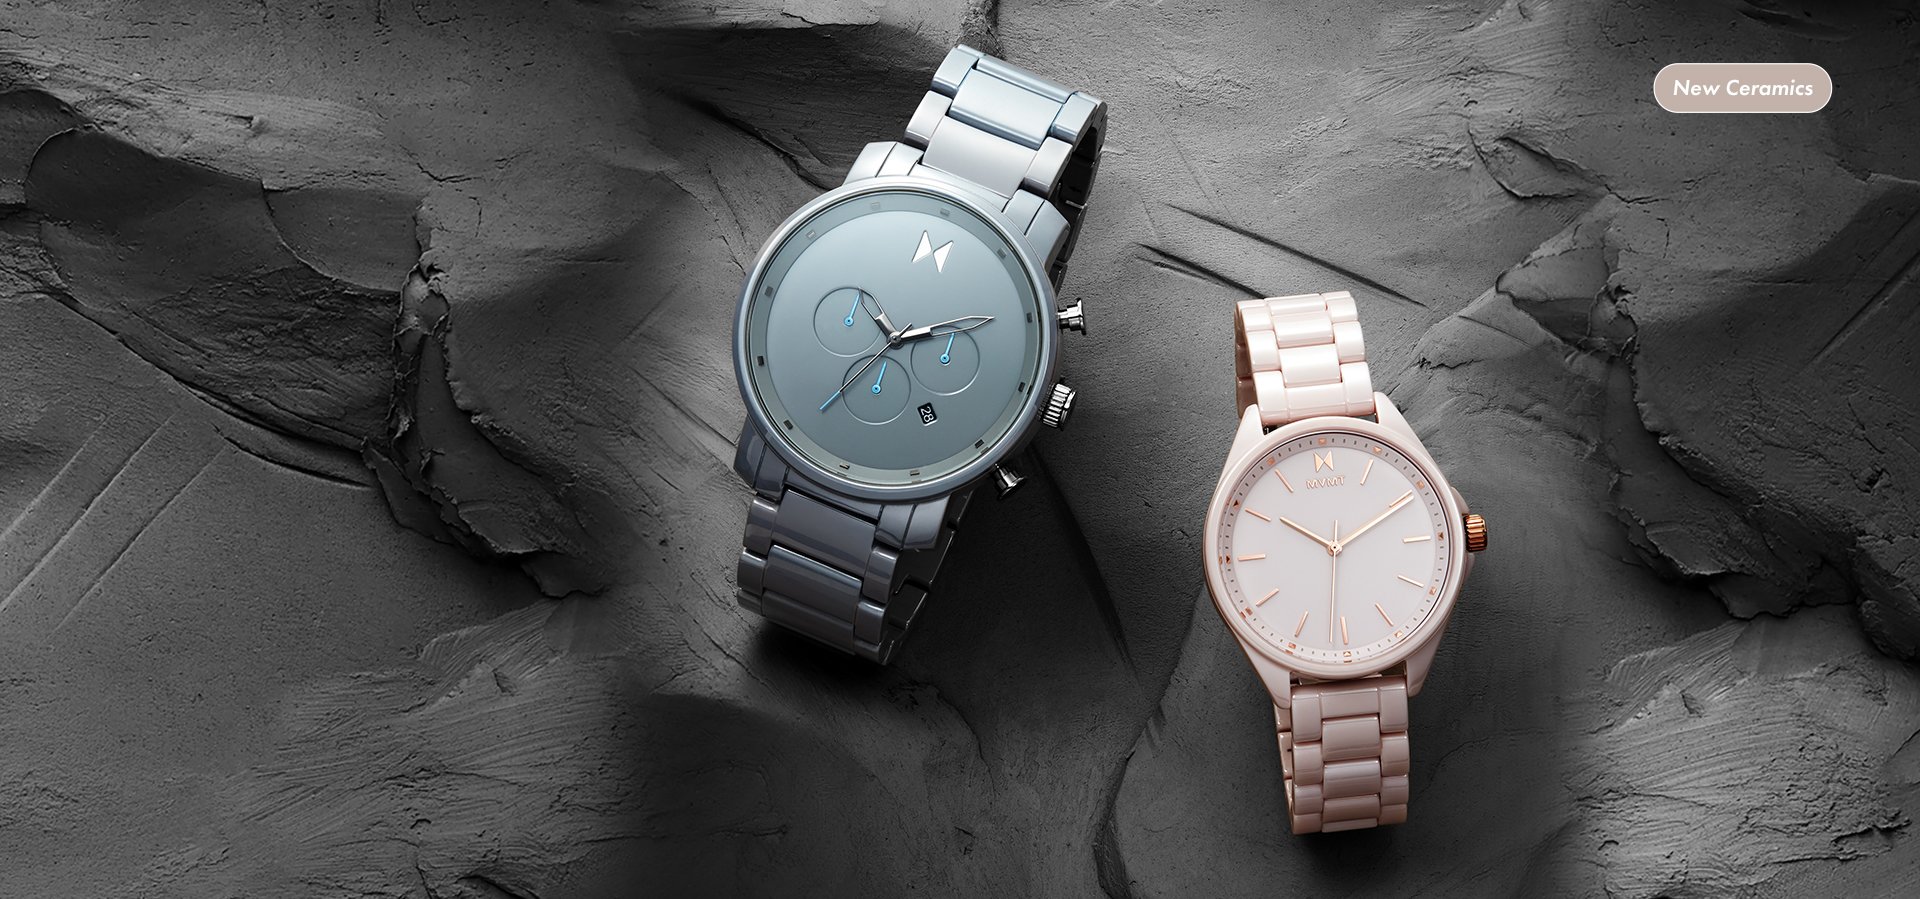 mens and womens MVMT ceramic watches on stones